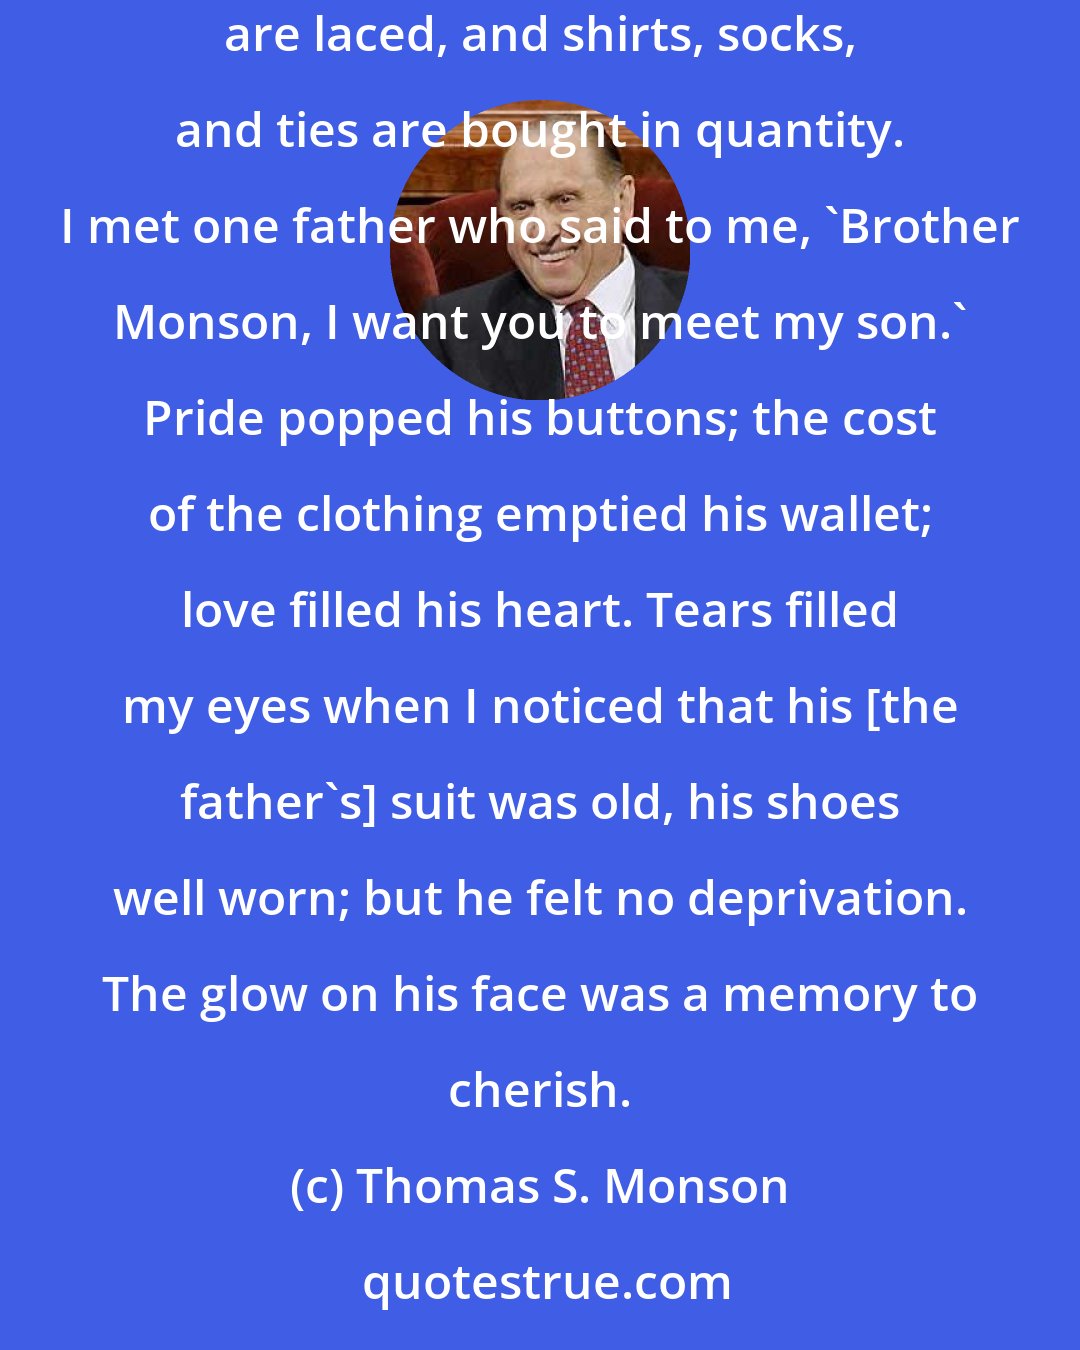 Thomas S. Monson: On occasion I have observed parents shopping to clothe a son about to enter missionary service. The new suits are fitted, the new shoes are laced, and shirts, socks, and ties are bought in quantity. I met one father who said to me, 'Brother Monson, I want you to meet my son.' Pride popped his buttons; the cost of the clothing emptied his wallet; love filled his heart. Tears filled my eyes when I noticed that his [the father's] suit was old, his shoes well worn; but he felt no deprivation. The glow on his face was a memory to cherish.